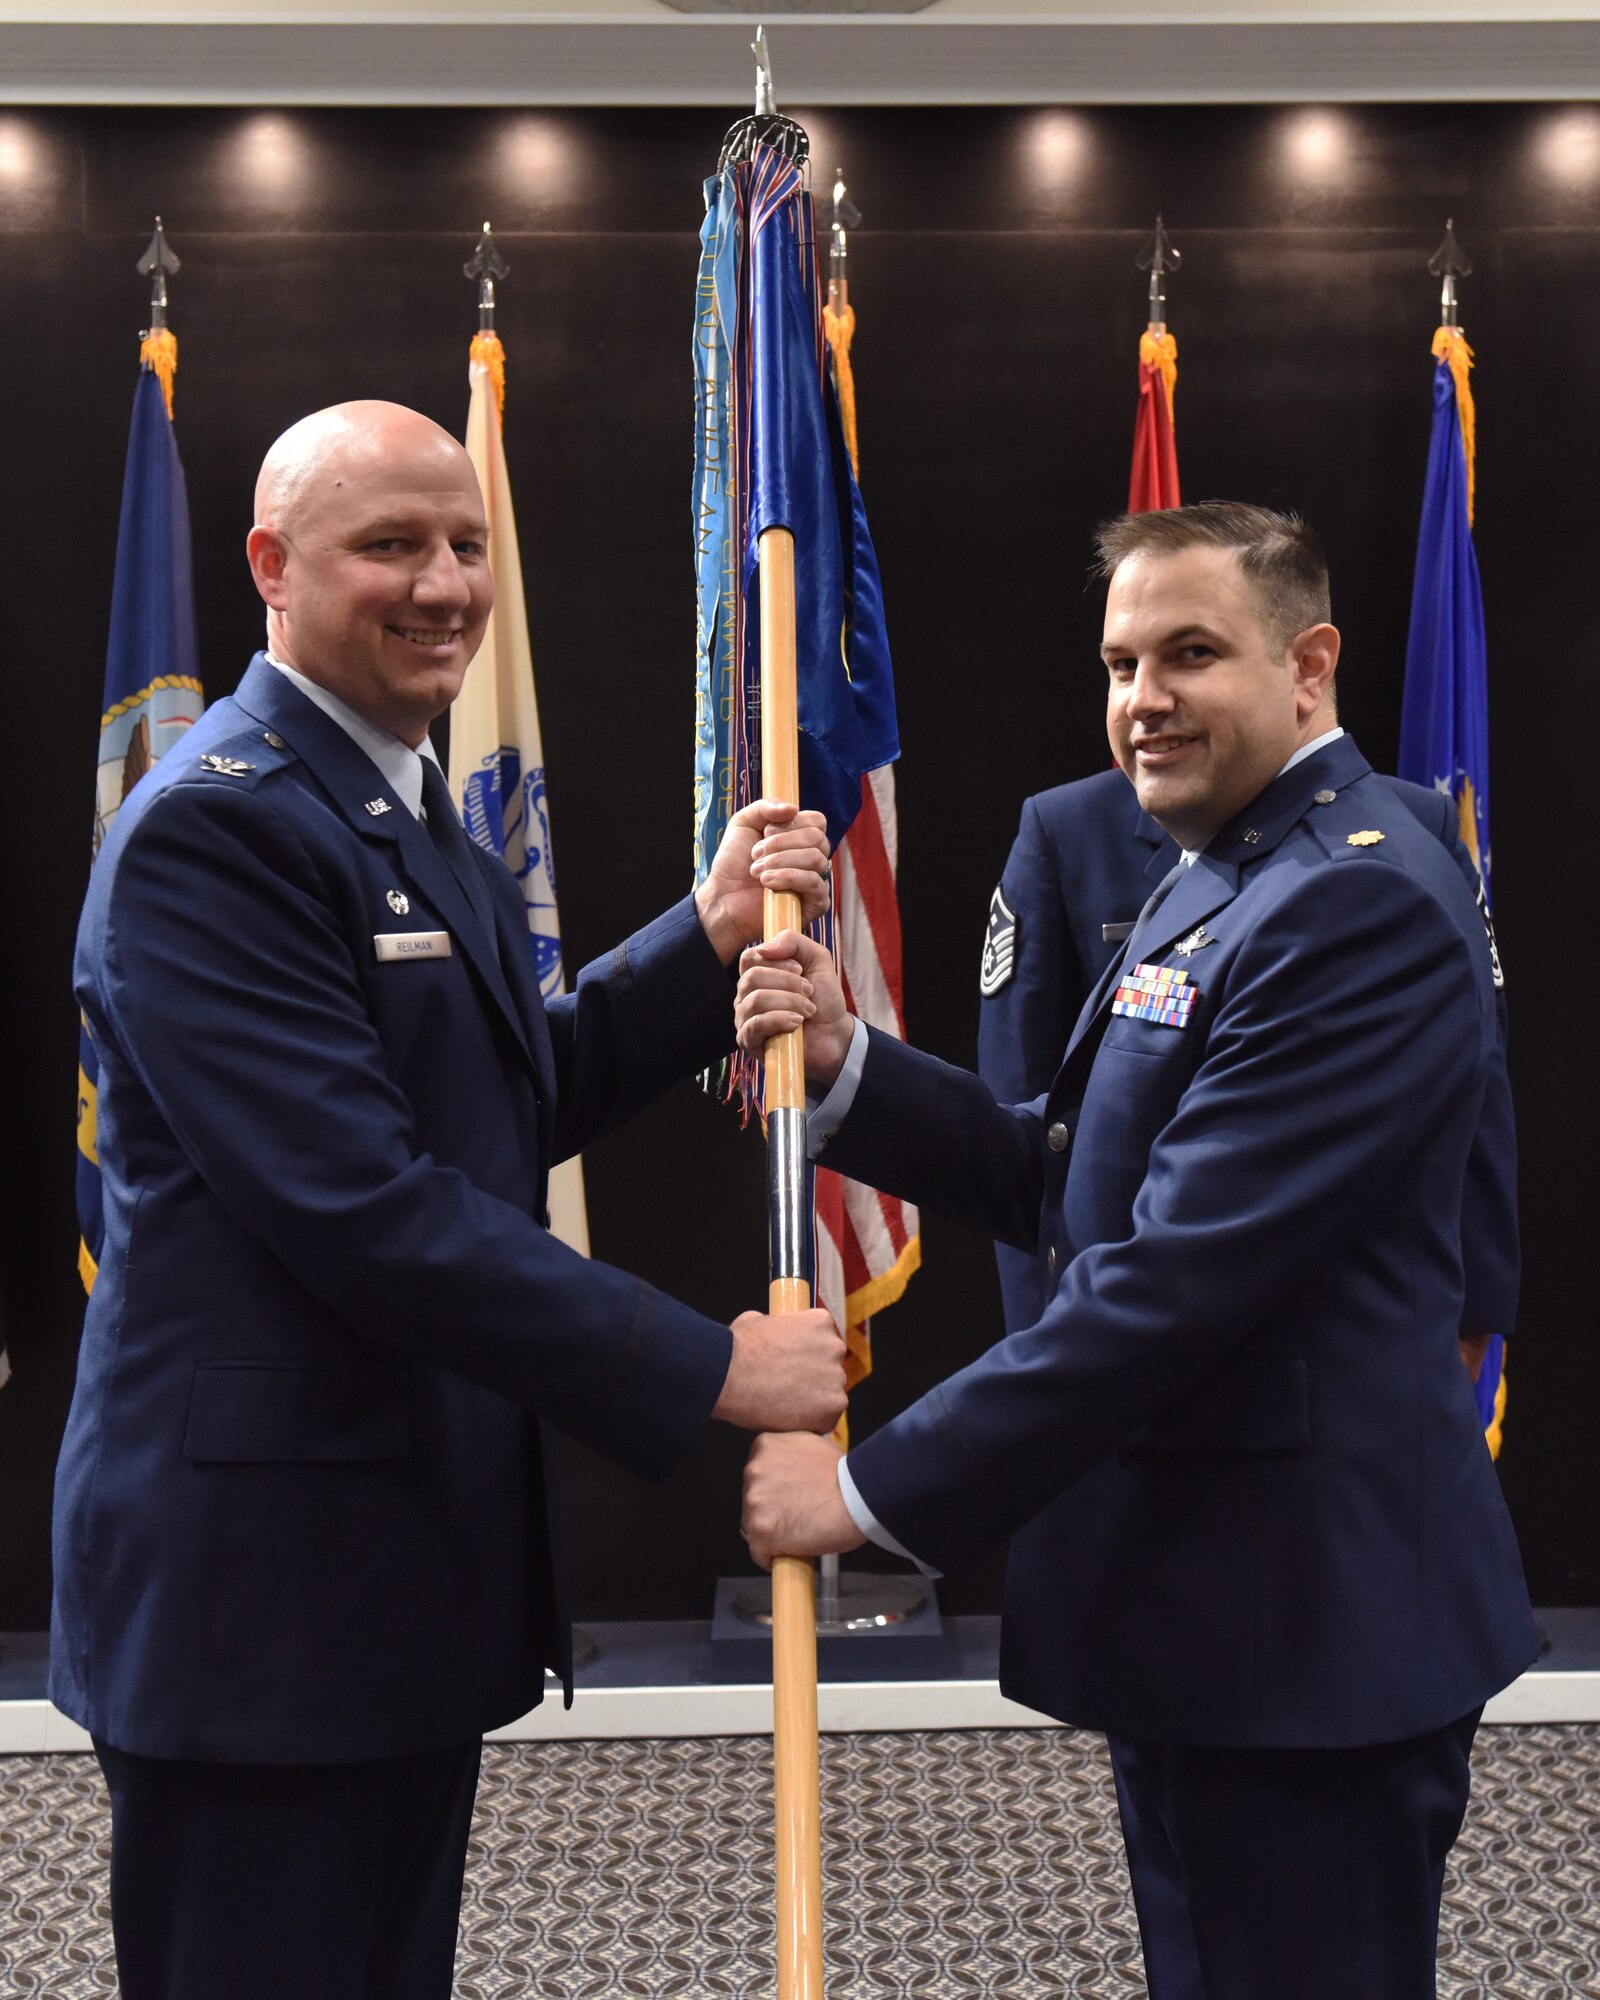 U.S. Air Force Maj. Dexter Webb (right), incoming 17th Communication Squadron commander, assumes command from Col. Matthew Reilman, 17th Training Wing commander, during the 17th CS change of command ceremony, at the Powell Event Center, Goodfellow Air Force Base, Texas, May 5, 2022.  Changes of command are a military tradition representing the transfer of responsibilities from the presiding official to the upcoming official. (U.S. Air Force photo by Airman 1st Class Zachary Heimbuch)